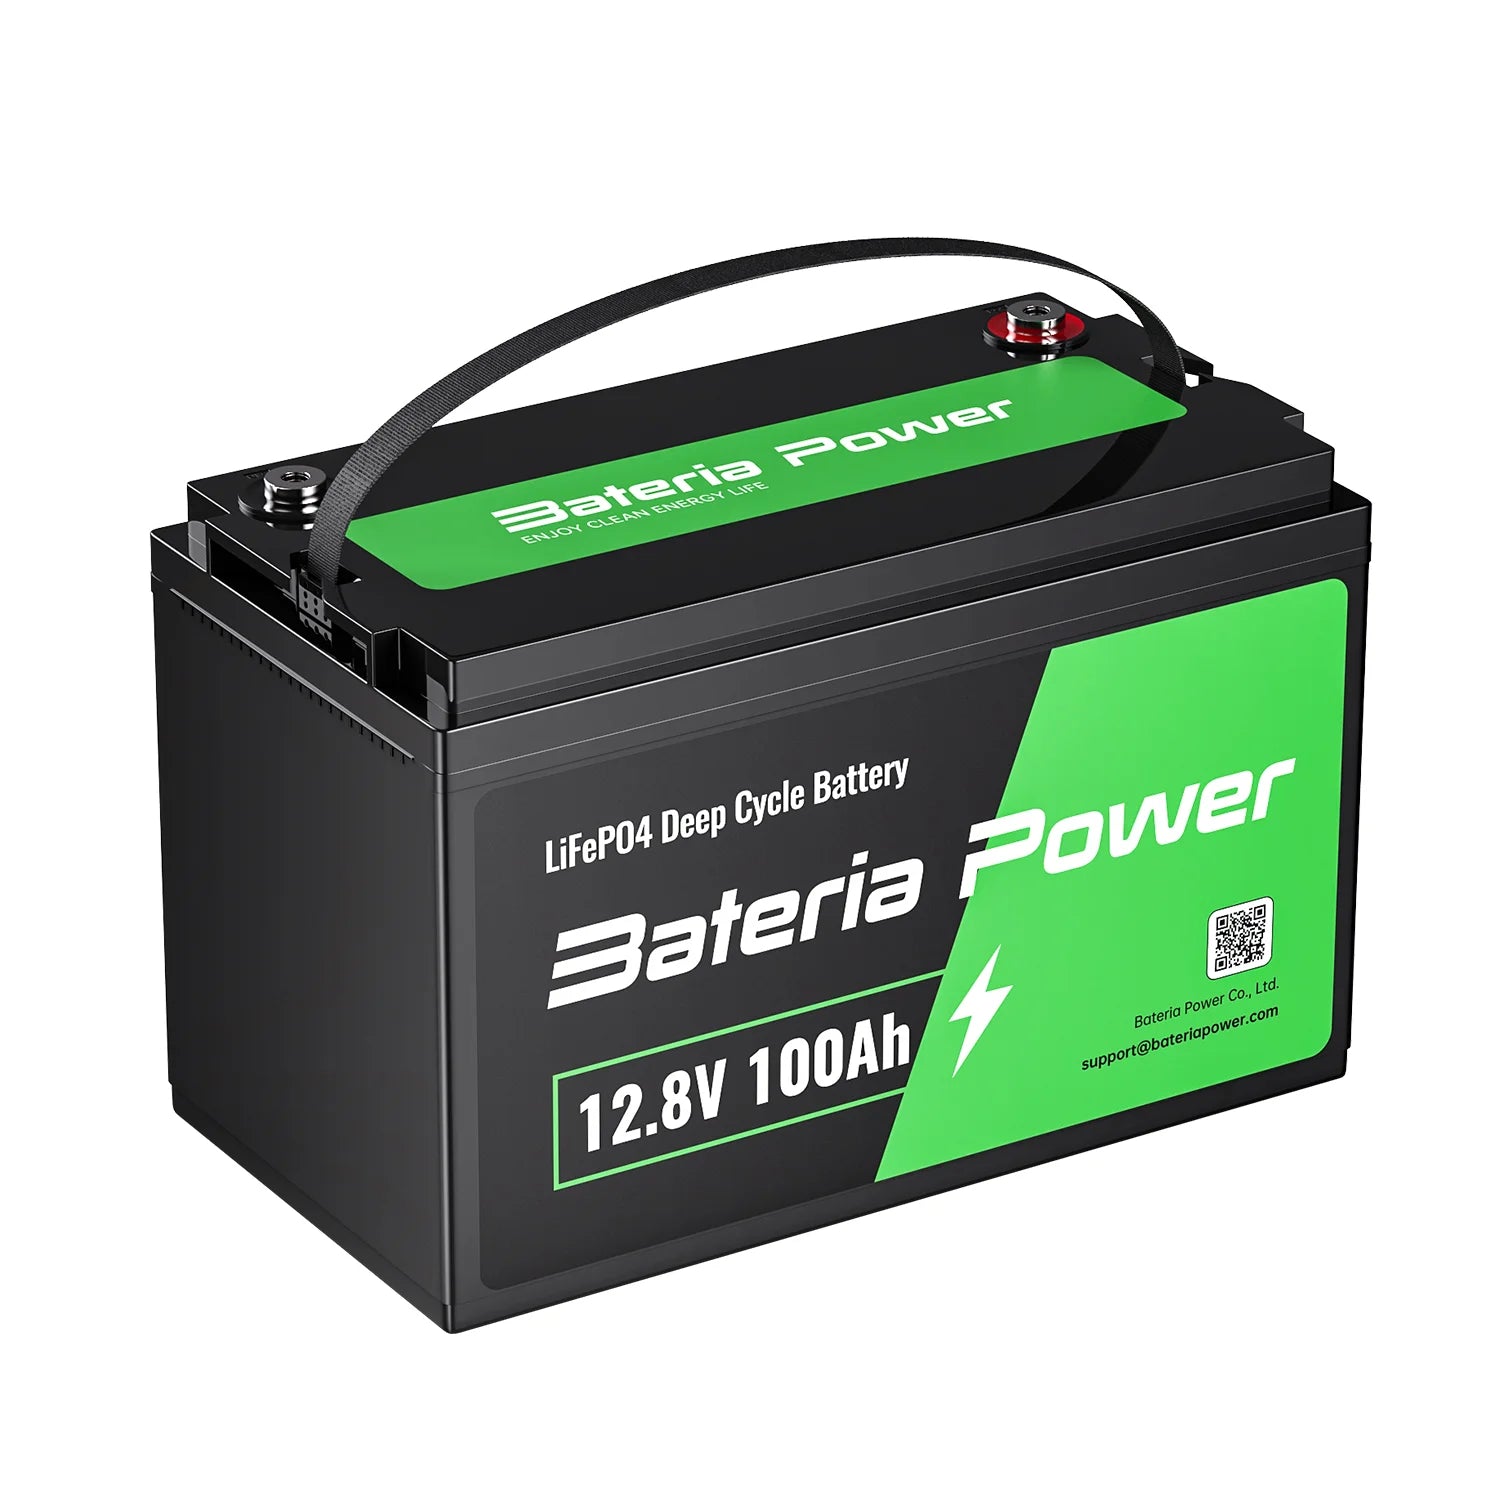 LiFePO4 Battery 12V 100AH Lithium Battery - Built-in 50A BMS, Perfect for Replacing Most of Backup Power, Home Energy Storage and Off-Grid etc.